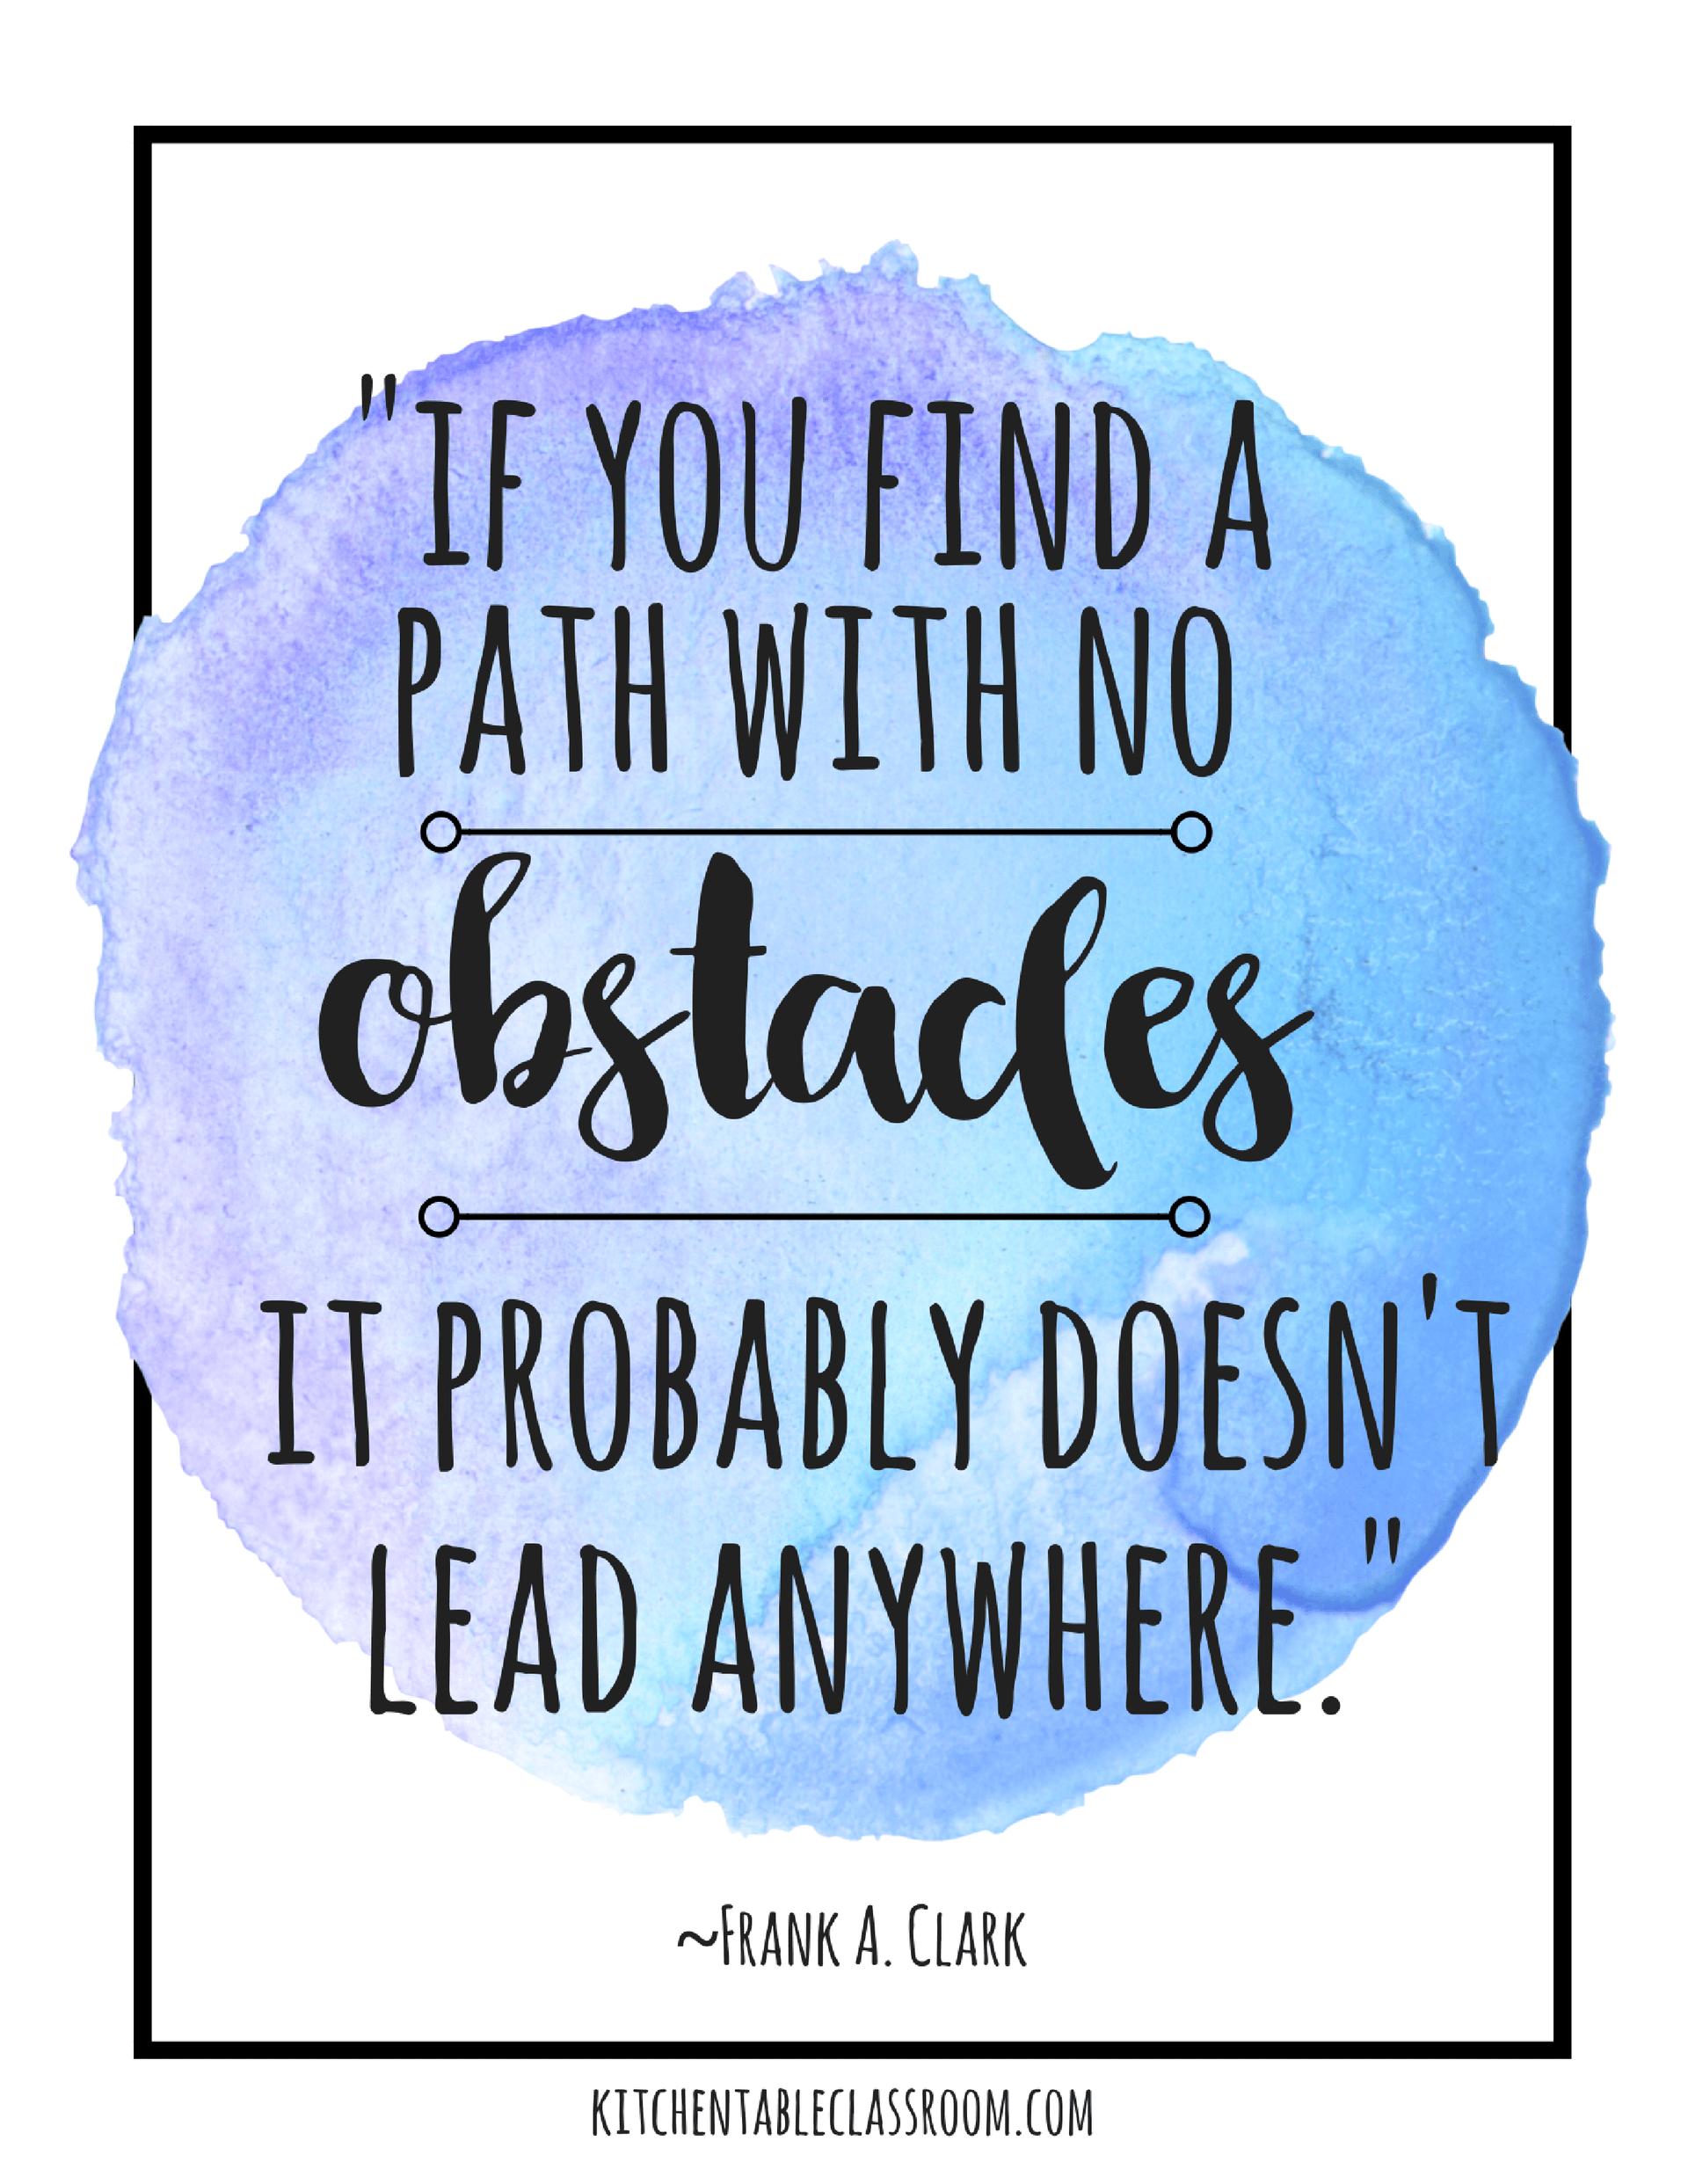 if you find a path with no obstacles it probably doesn’t lead anywhere. frank a. clark